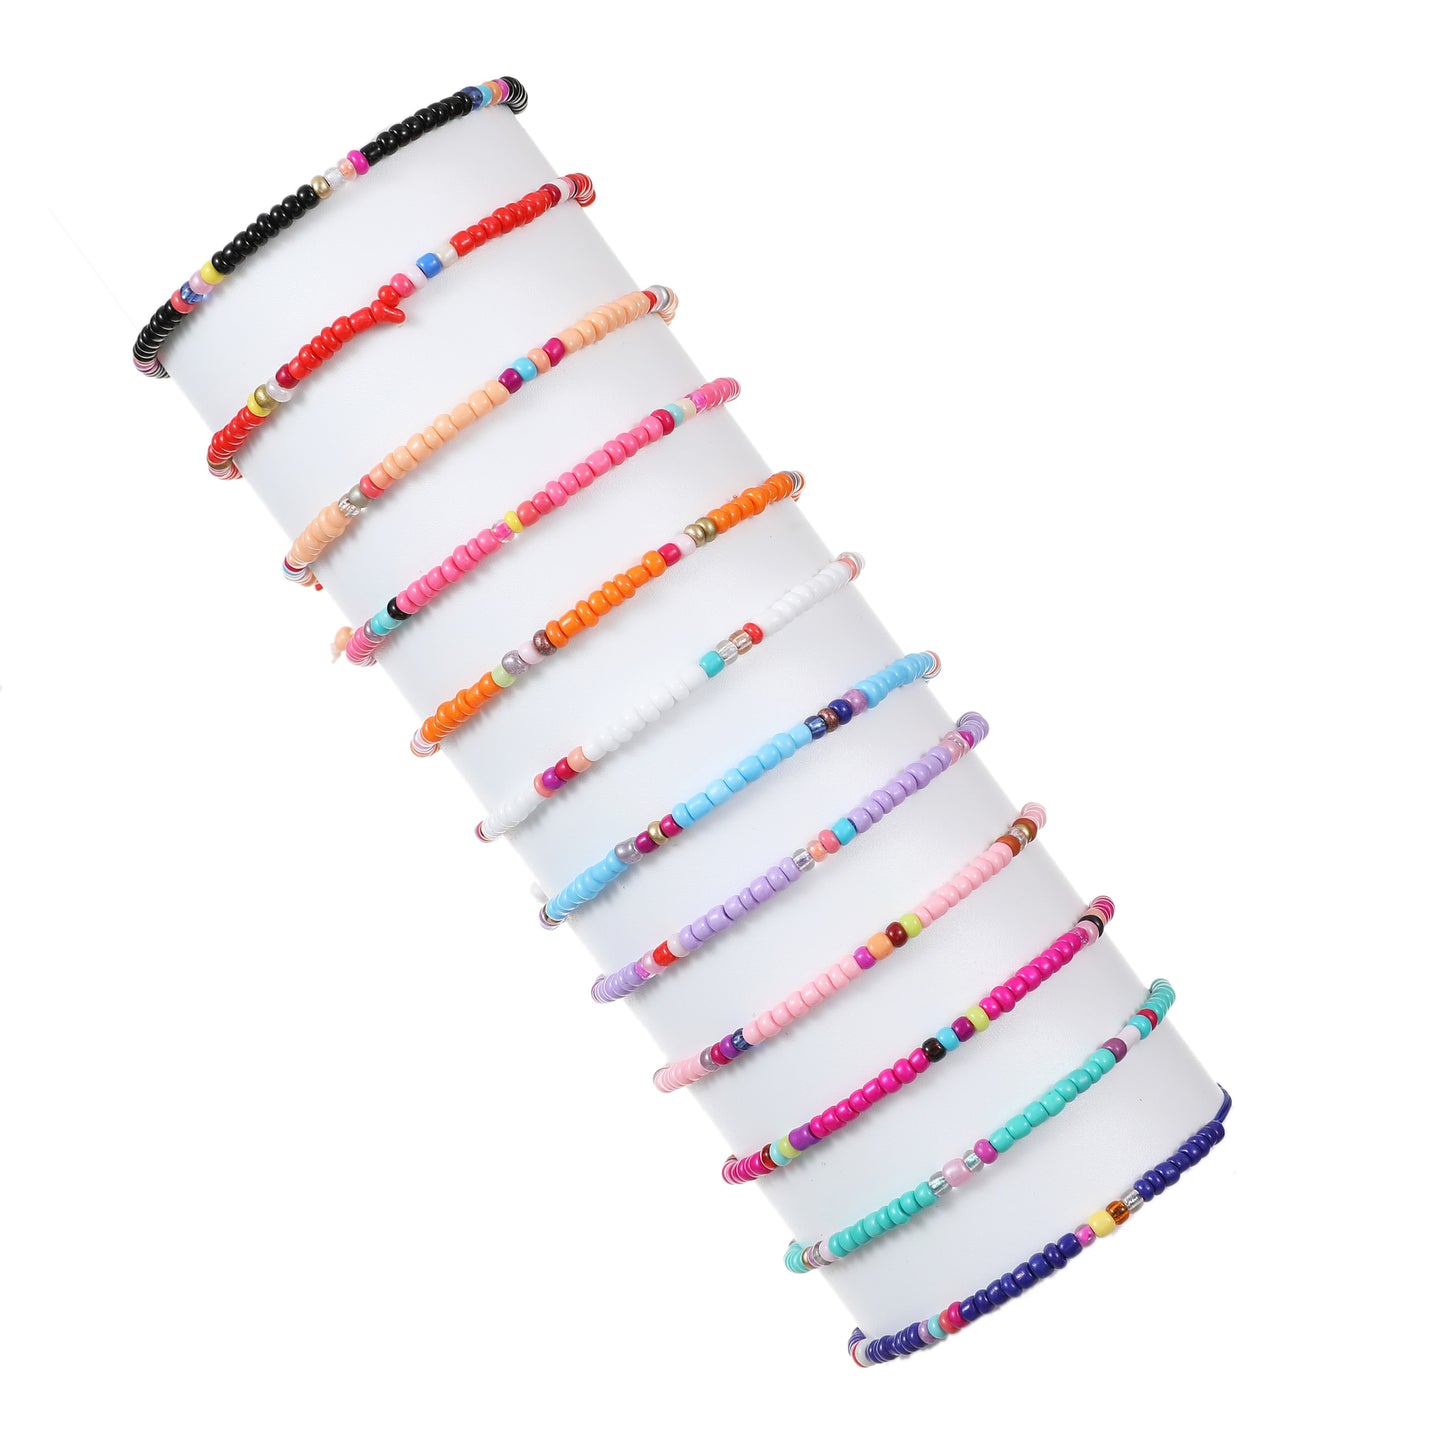 12pcs/lot Colorful Seeds Bead Bracelet for Women Men Adjustable Size Hand-woven Rope Chain Acrylic Bead Anklets